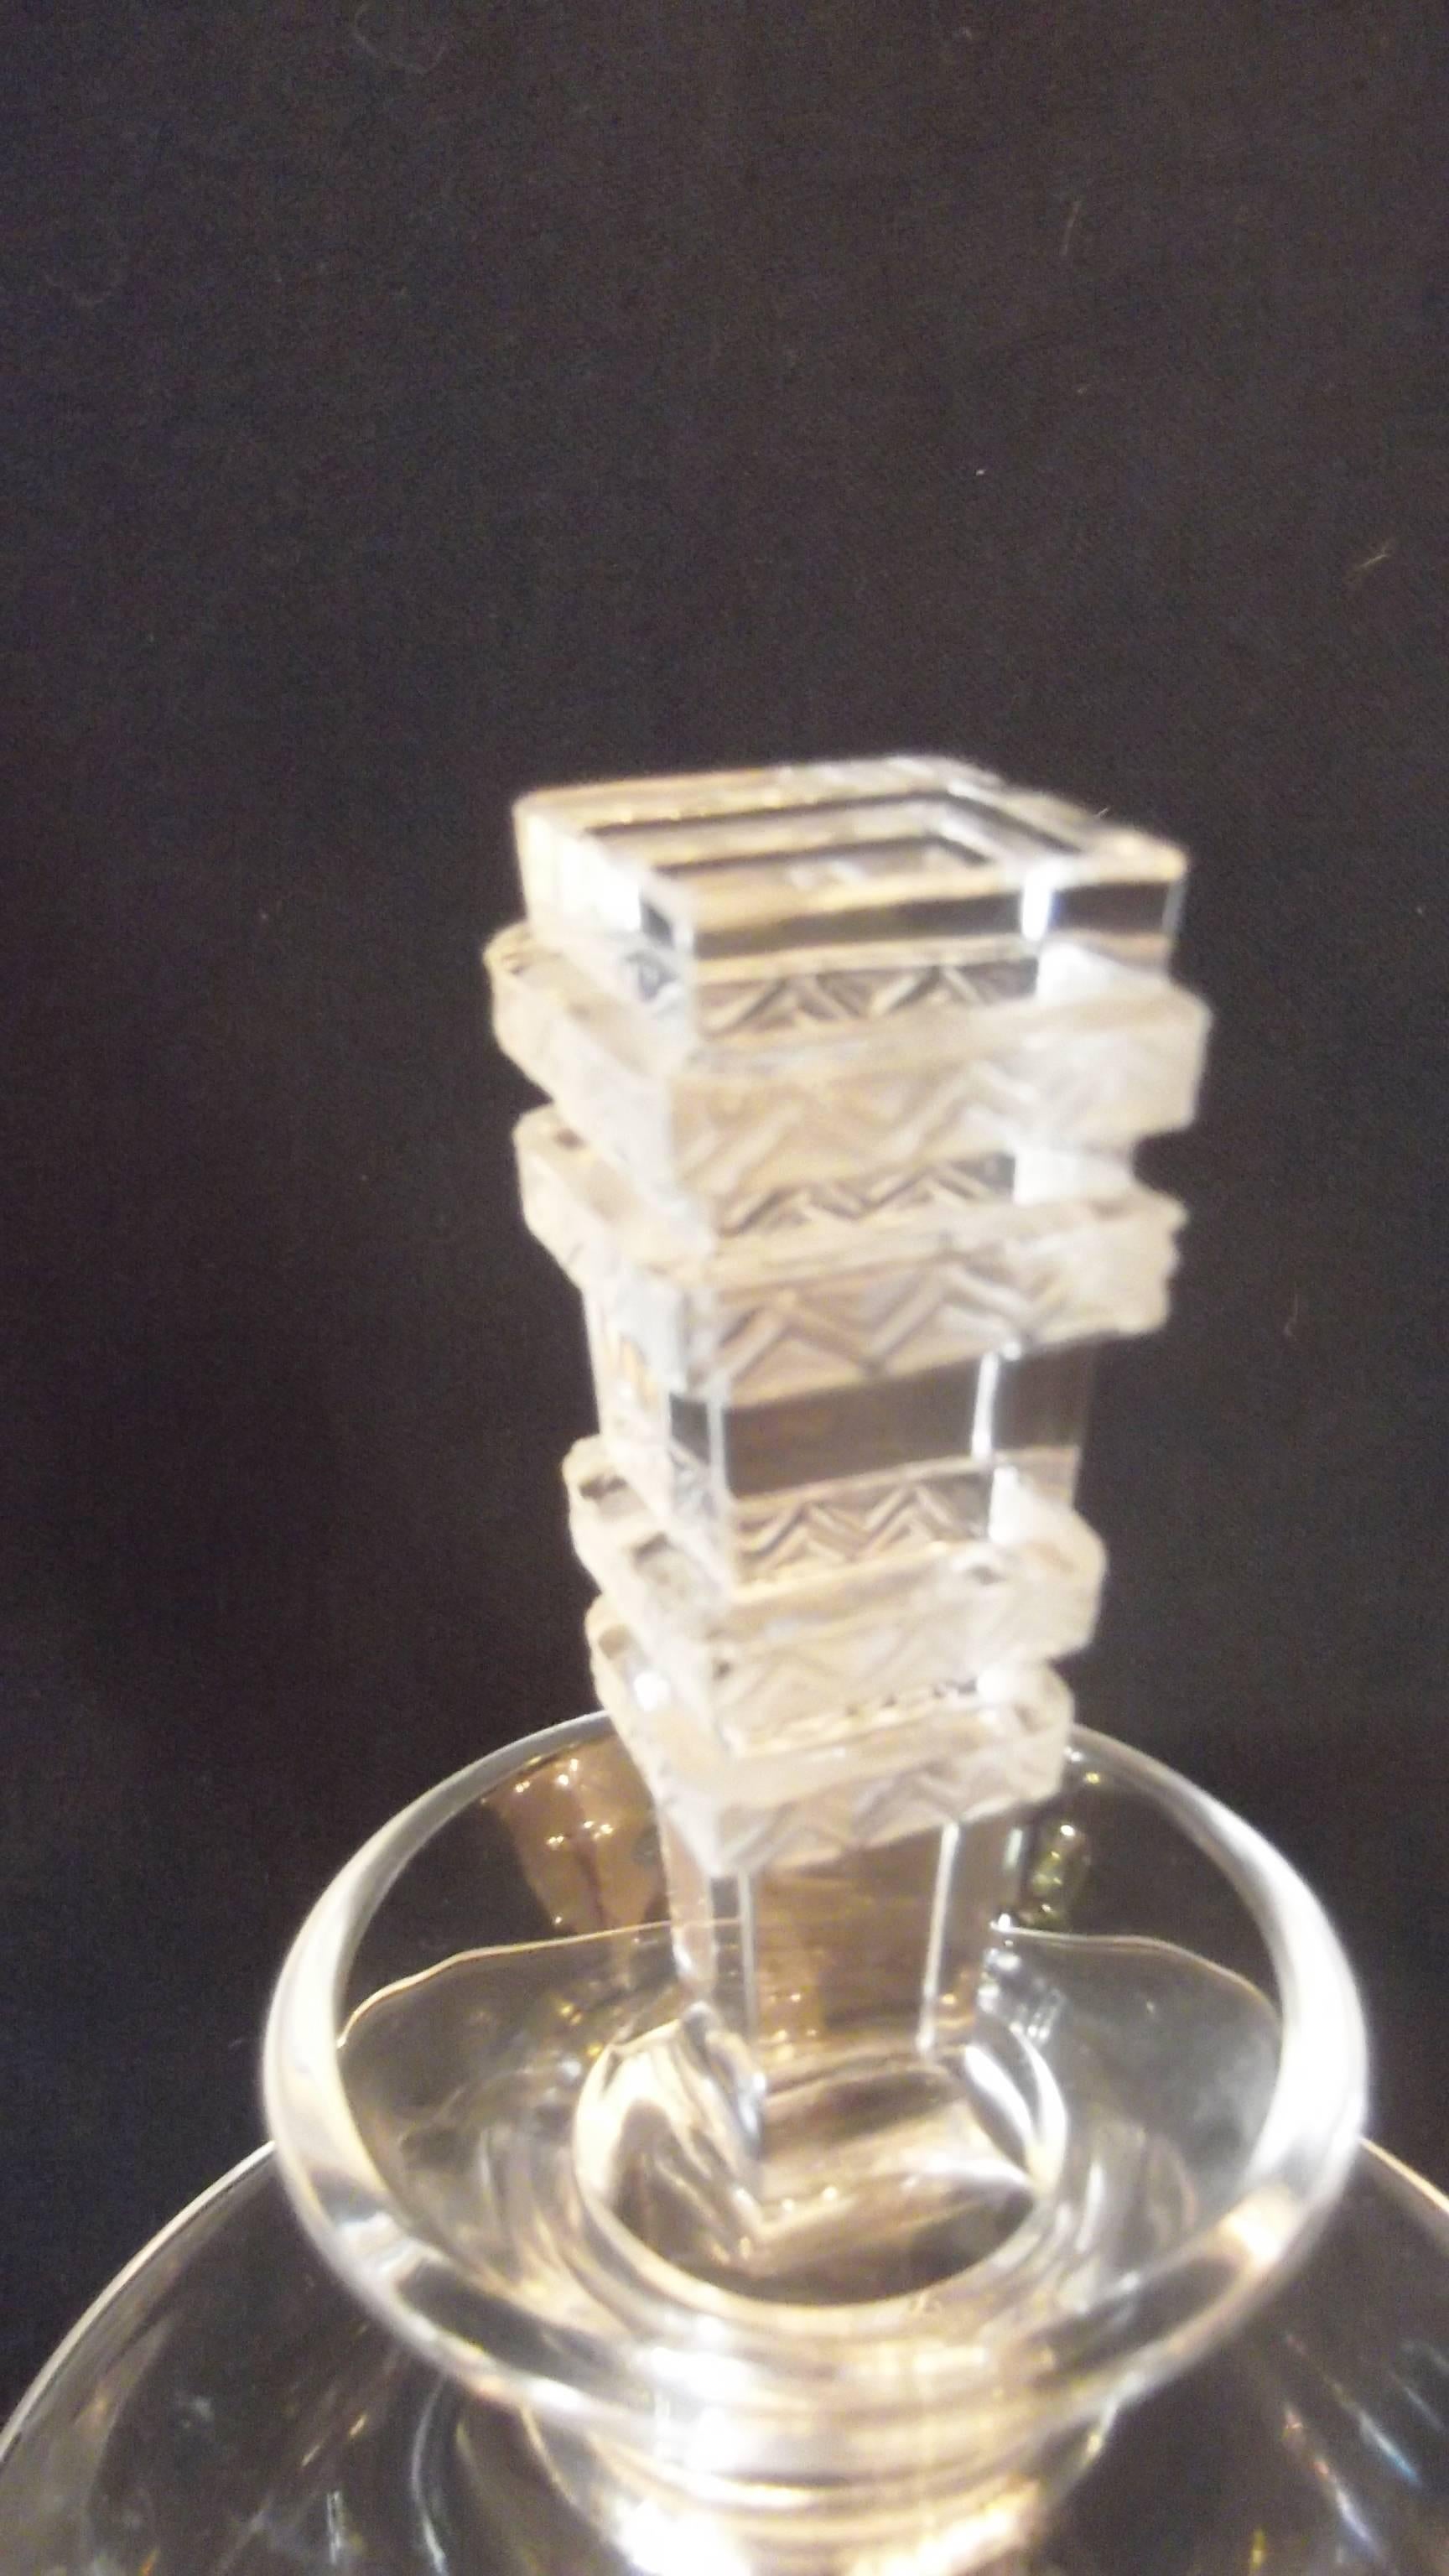 Beautiful pedestal Lalique decanter.  Neo Classic shape with Deco style stopper.  Clearly signed Lalique France on square base.  This piece is no longer in production and hard to find.   